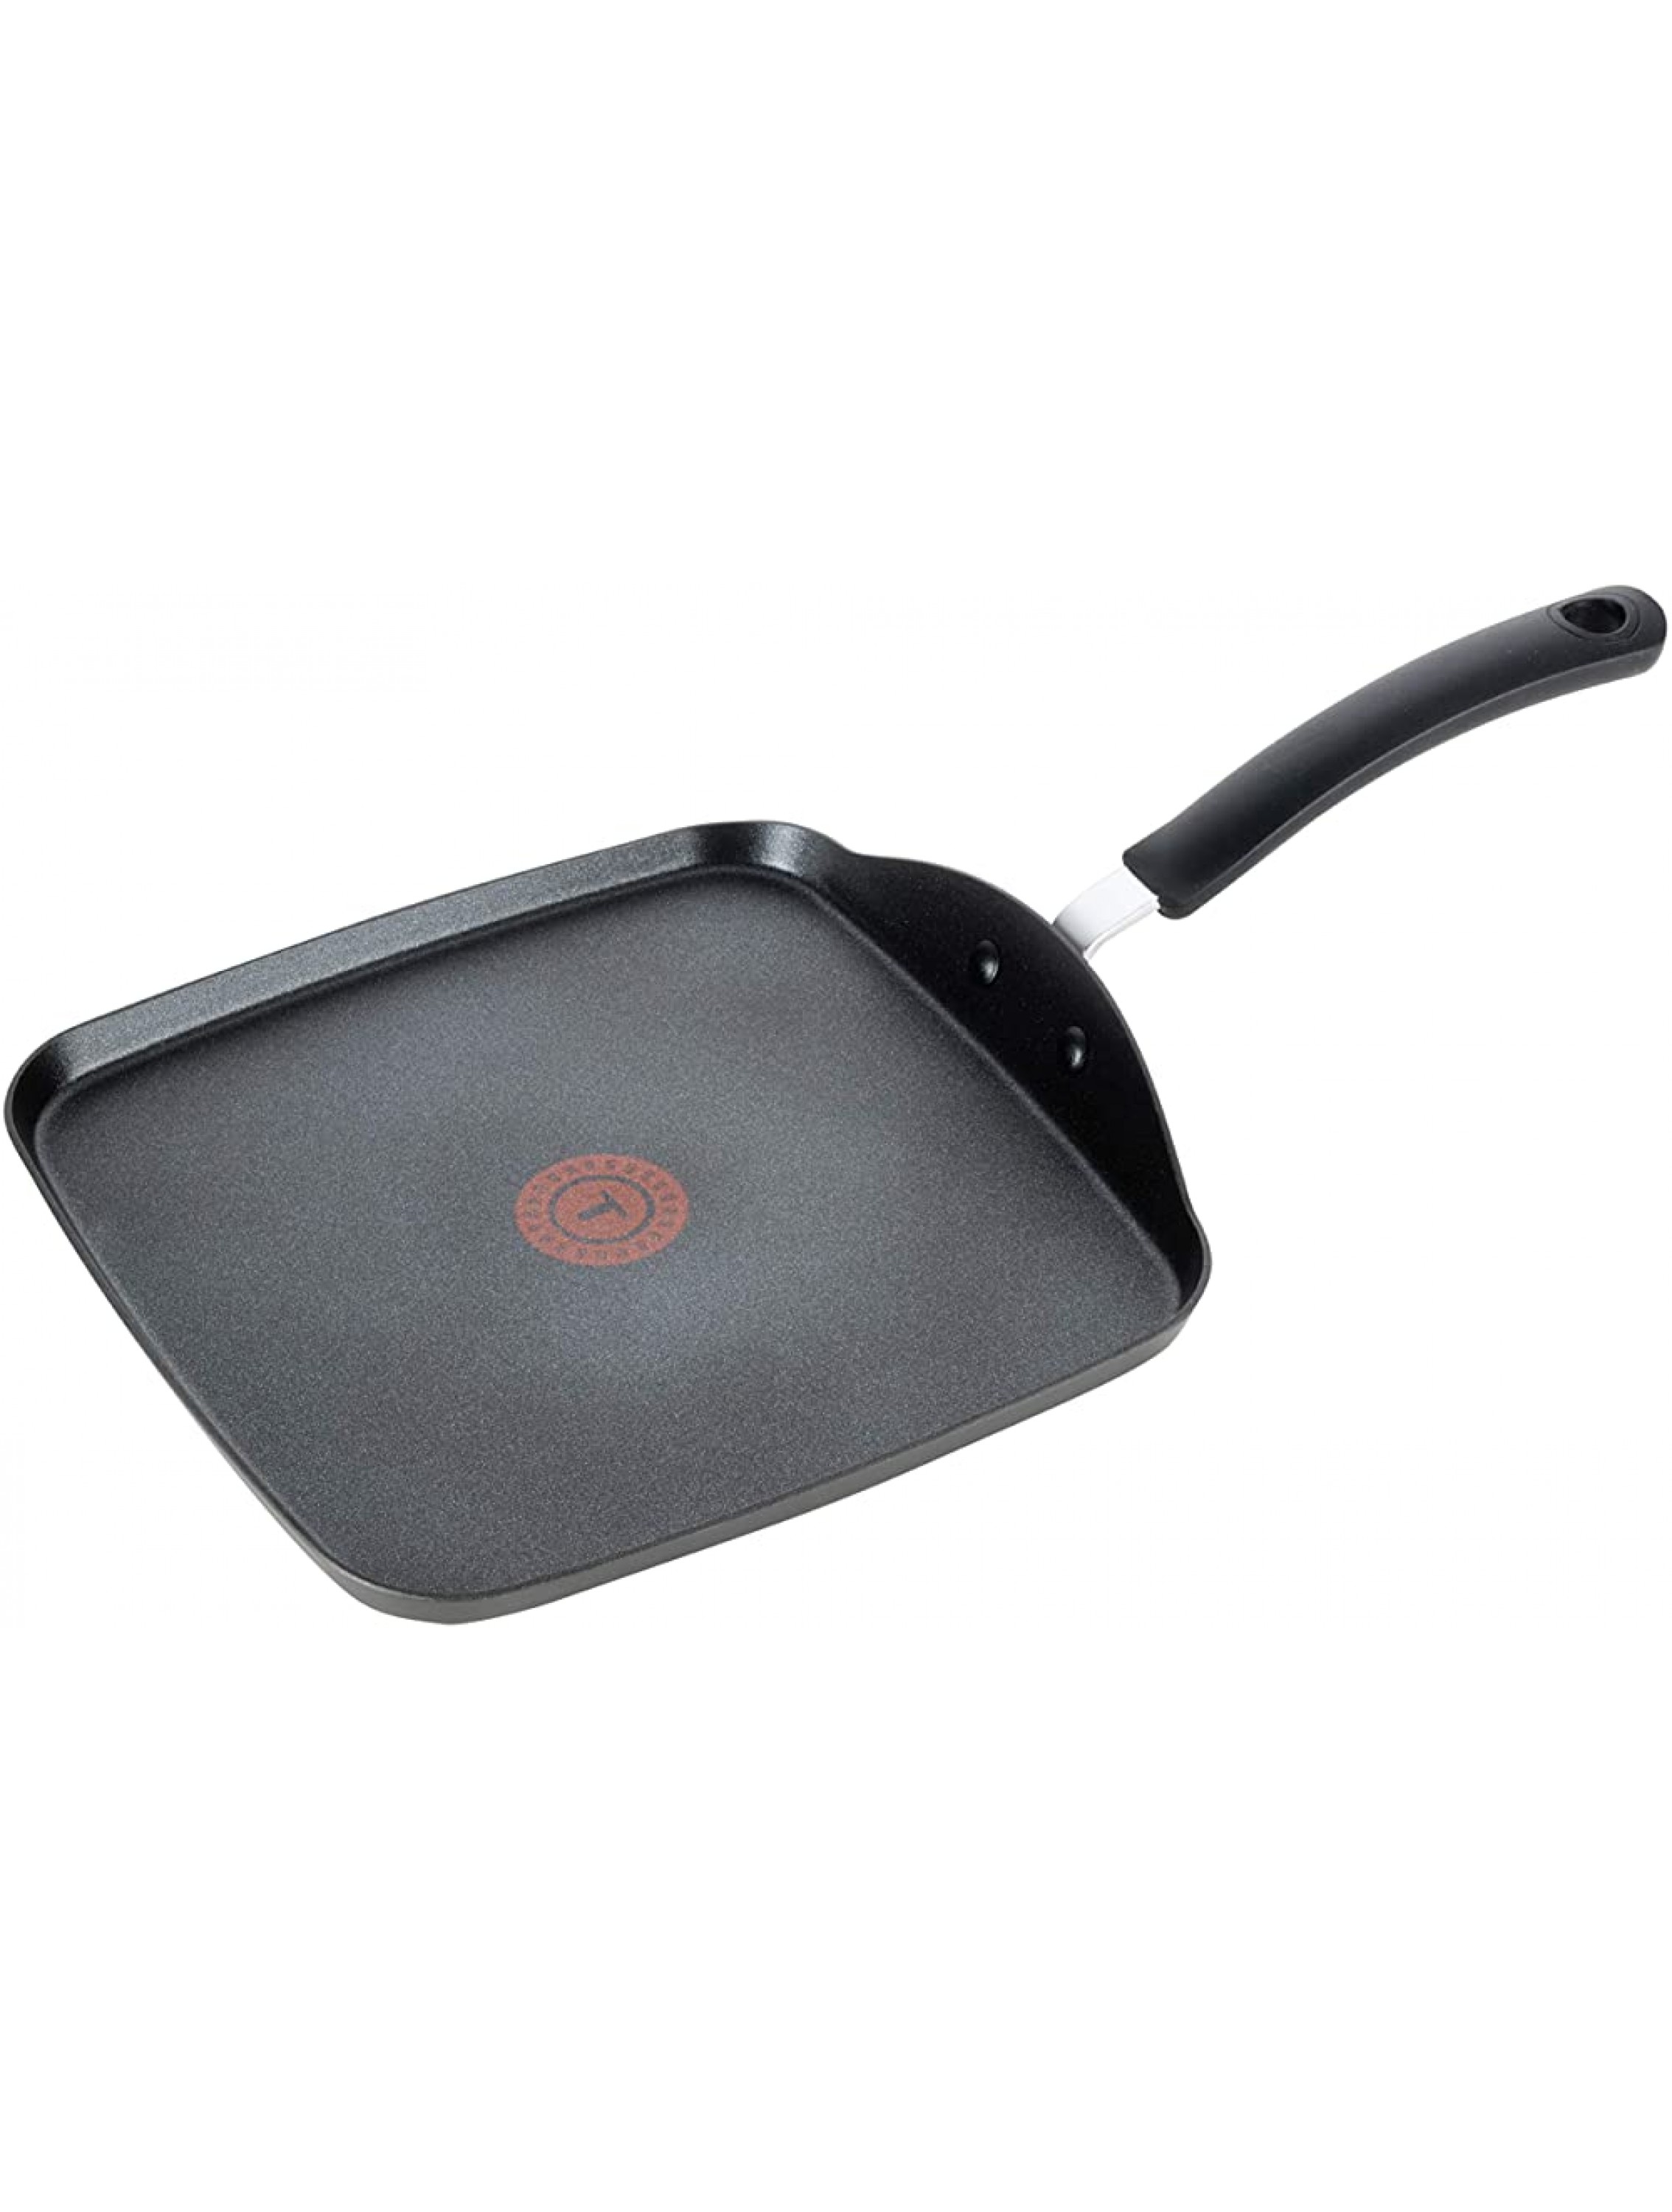 T-fal Ultimate Hard Anodized Nonstick 10.25 In. Square Griddle Black 10.25 Inch Grey - B4DJW6CY4